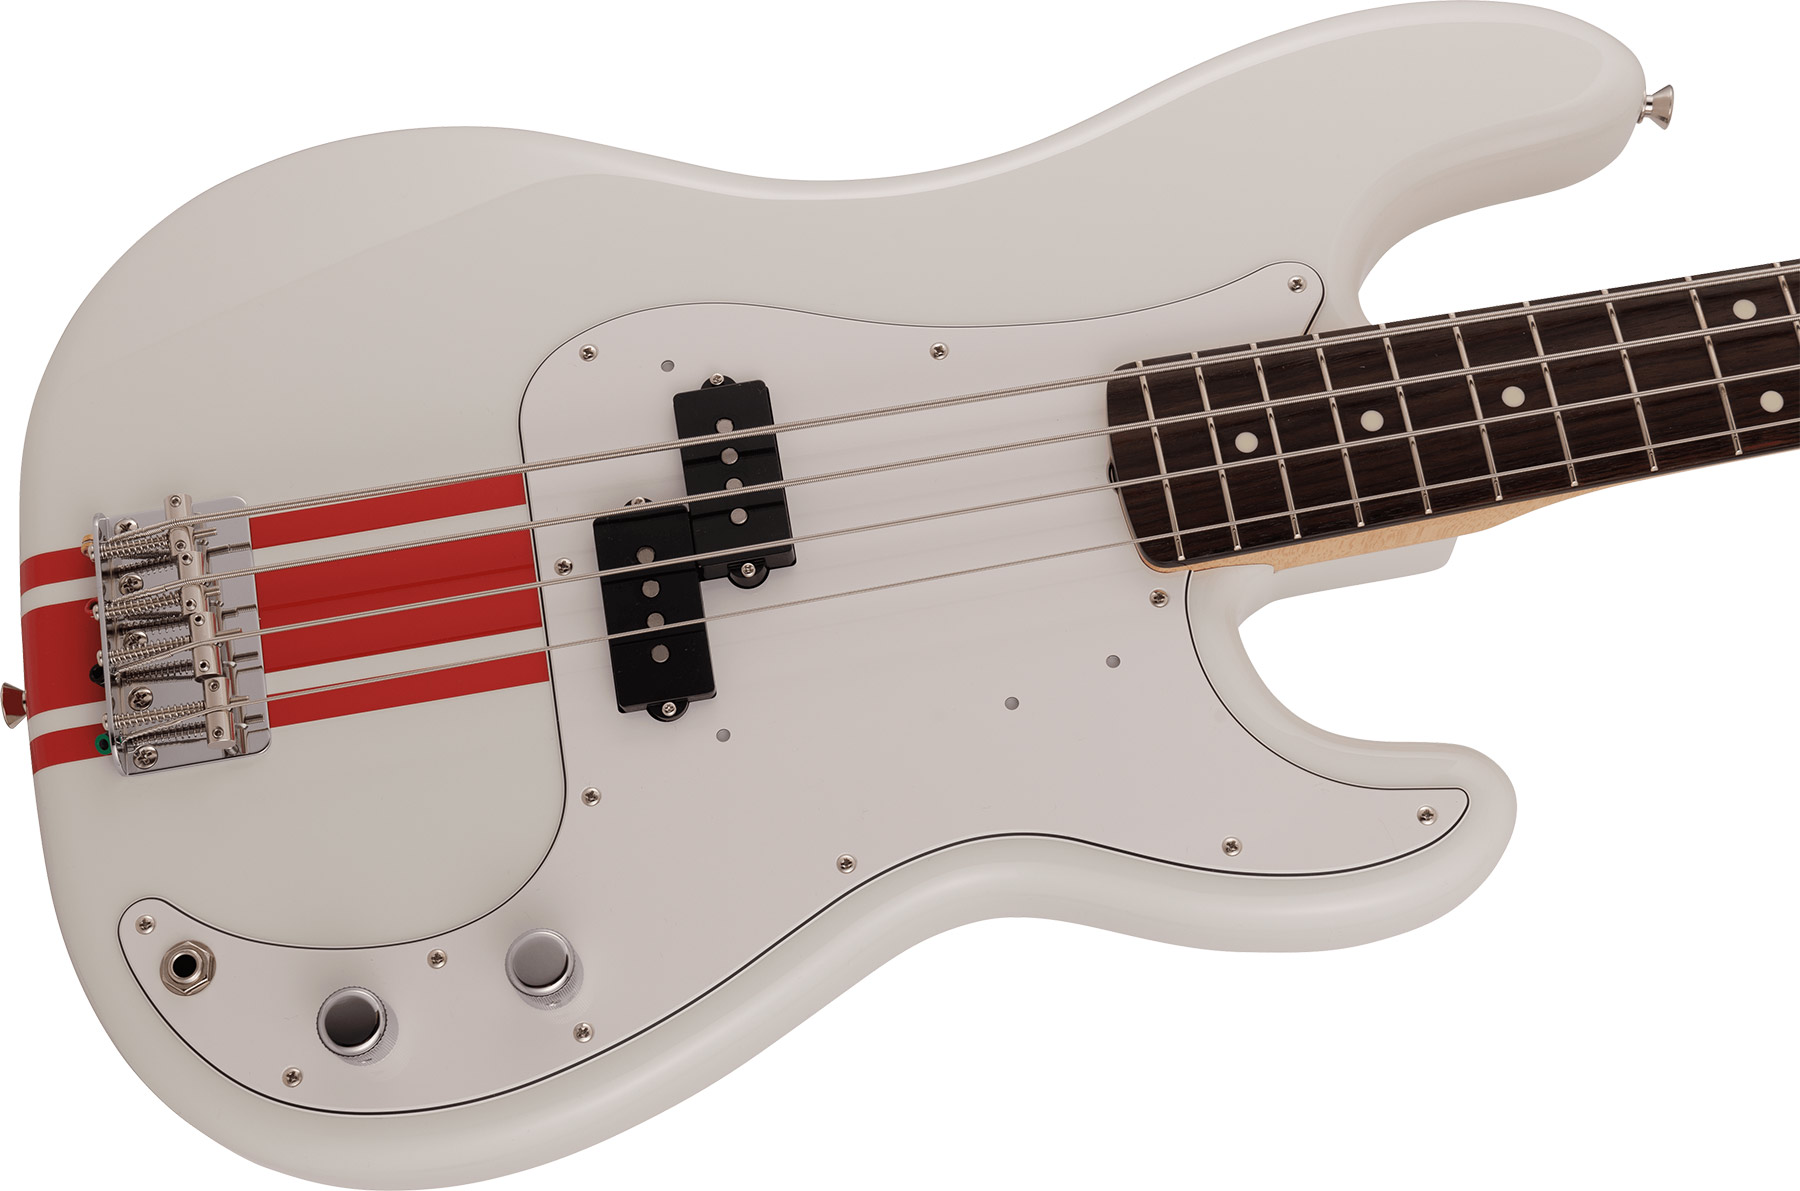 Fender Precision Bass Traditional 60s Mij Jap Rw - Olympic White W/ Red Competition Stripe - Bajo eléctrico de cuerpo sólido - Variation 2